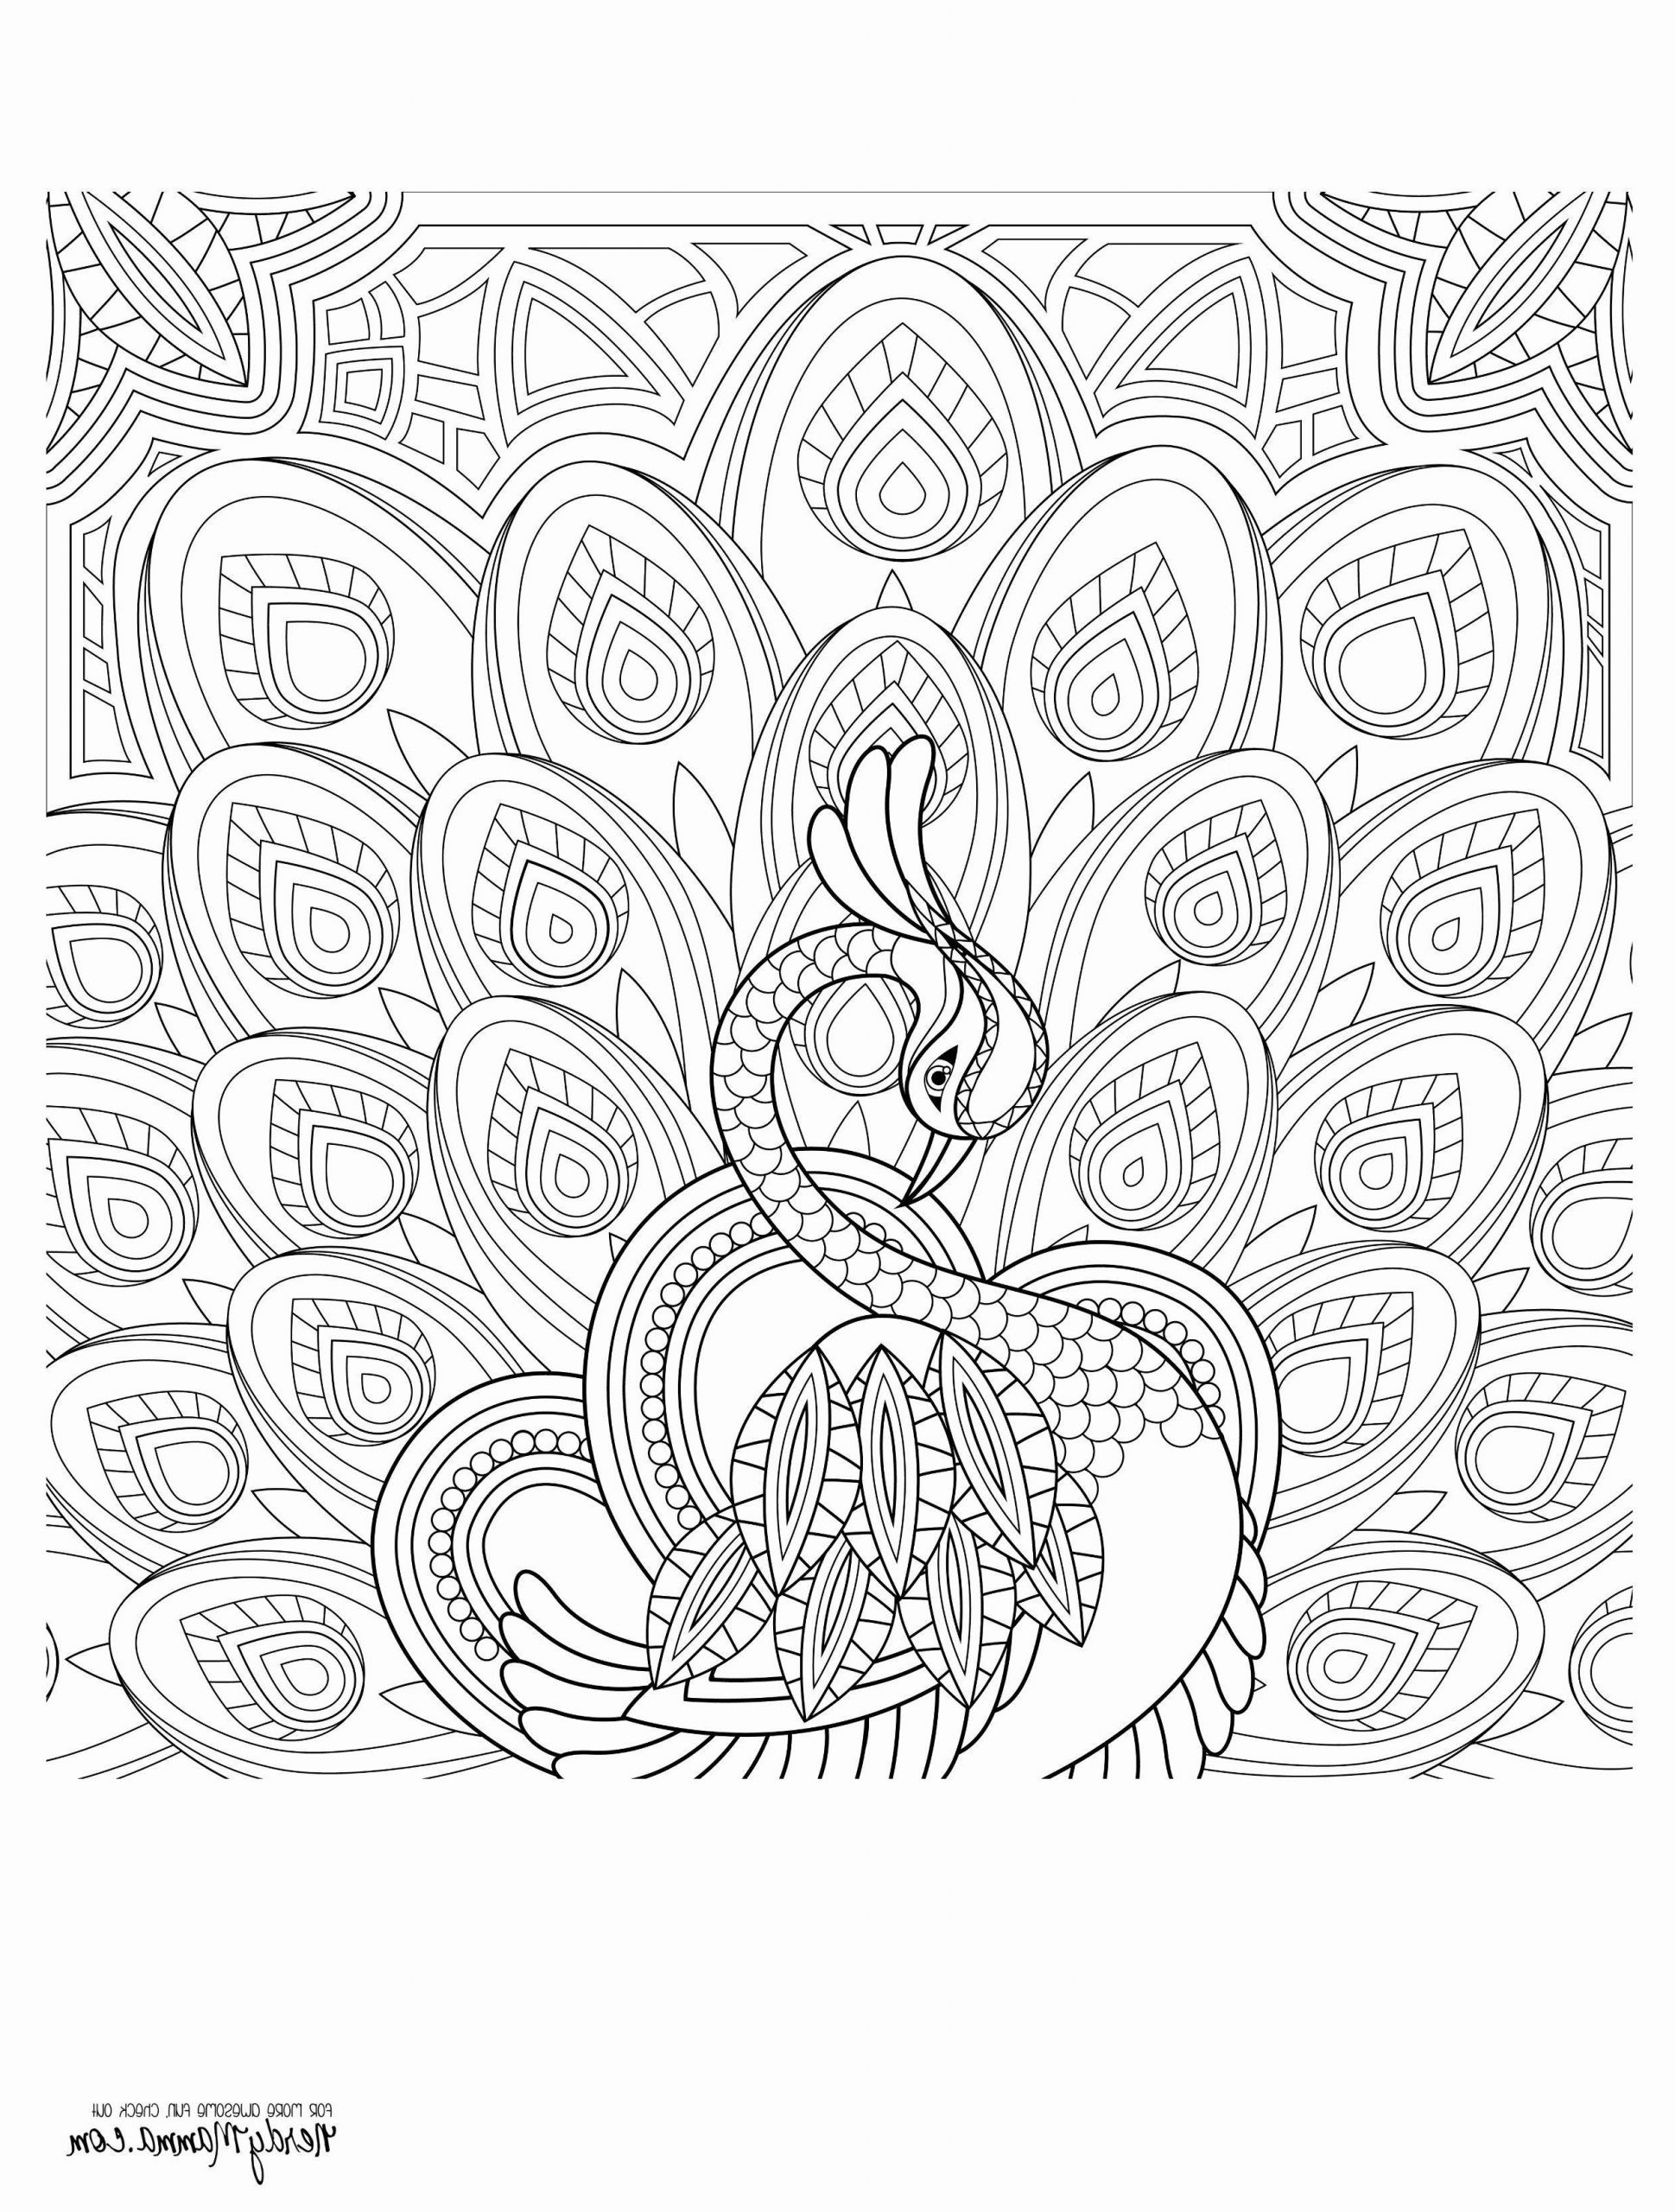 merry christmas coloring page for adults luxury image awesome kindergarten christmas tree coloring pages fym of merry christmas coloring page for adults